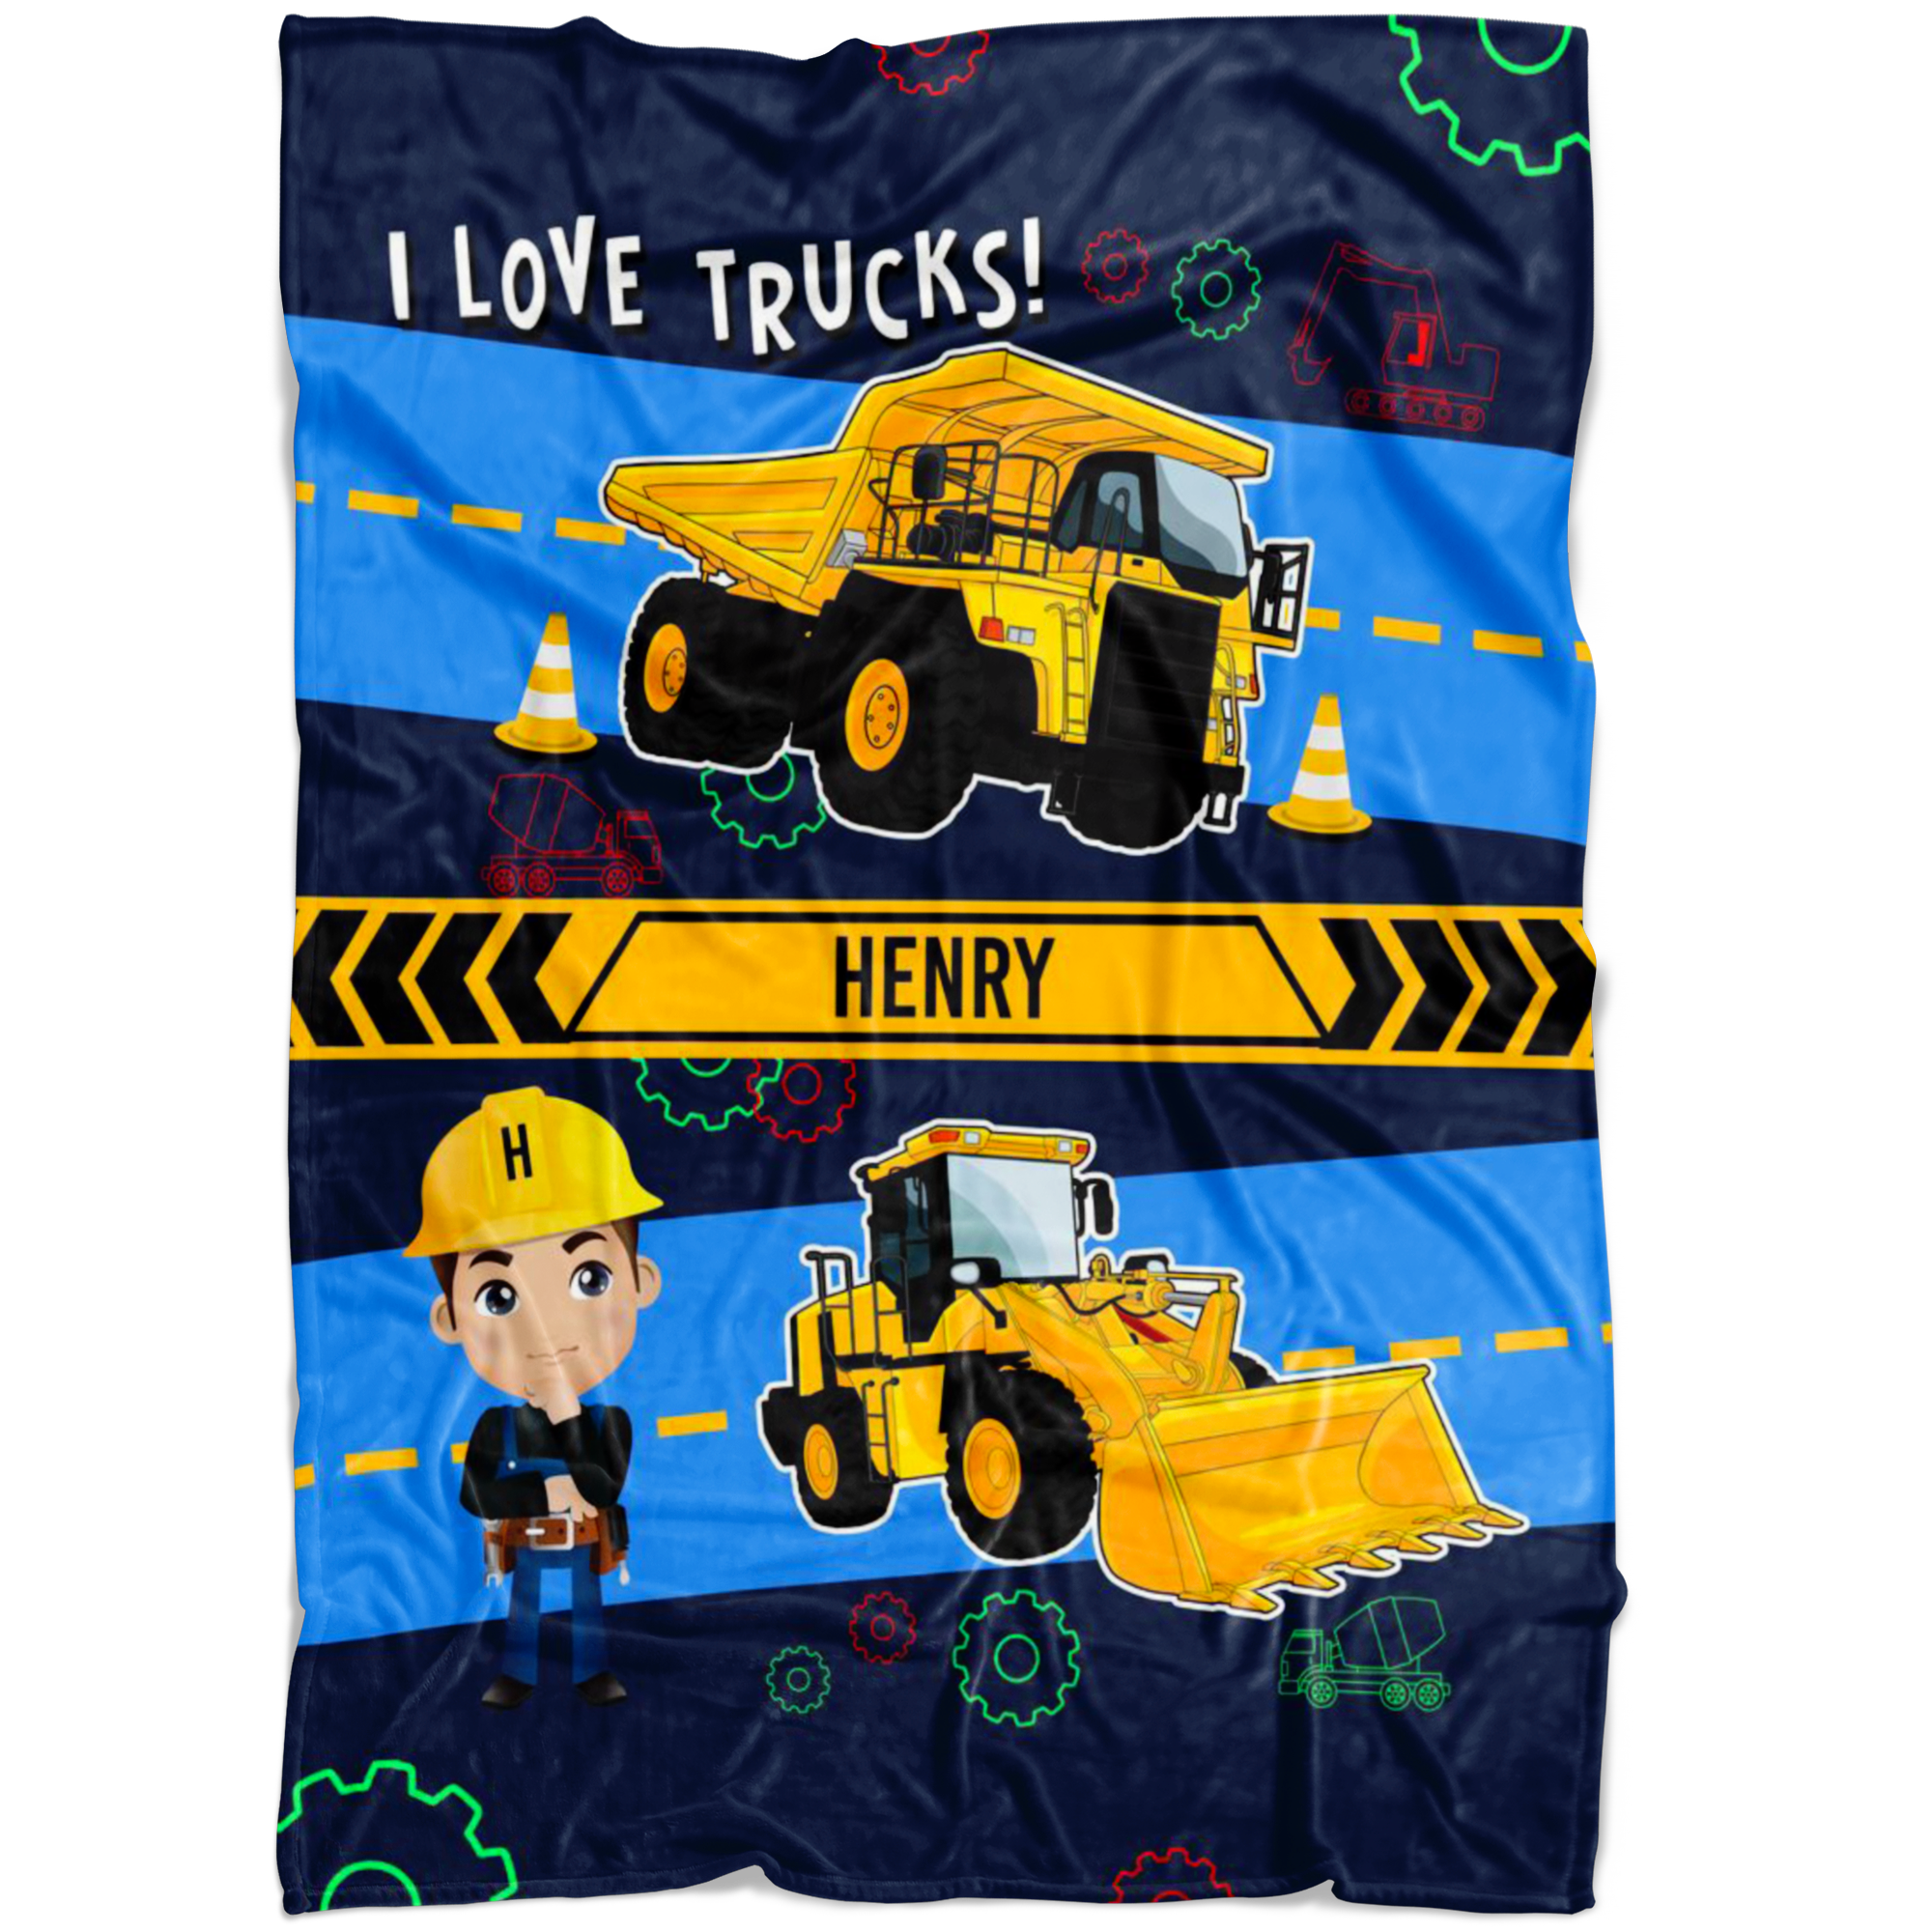 Personalized Name I Love Trucks Blanket for Boys & Girls with Character Personalization - Henry